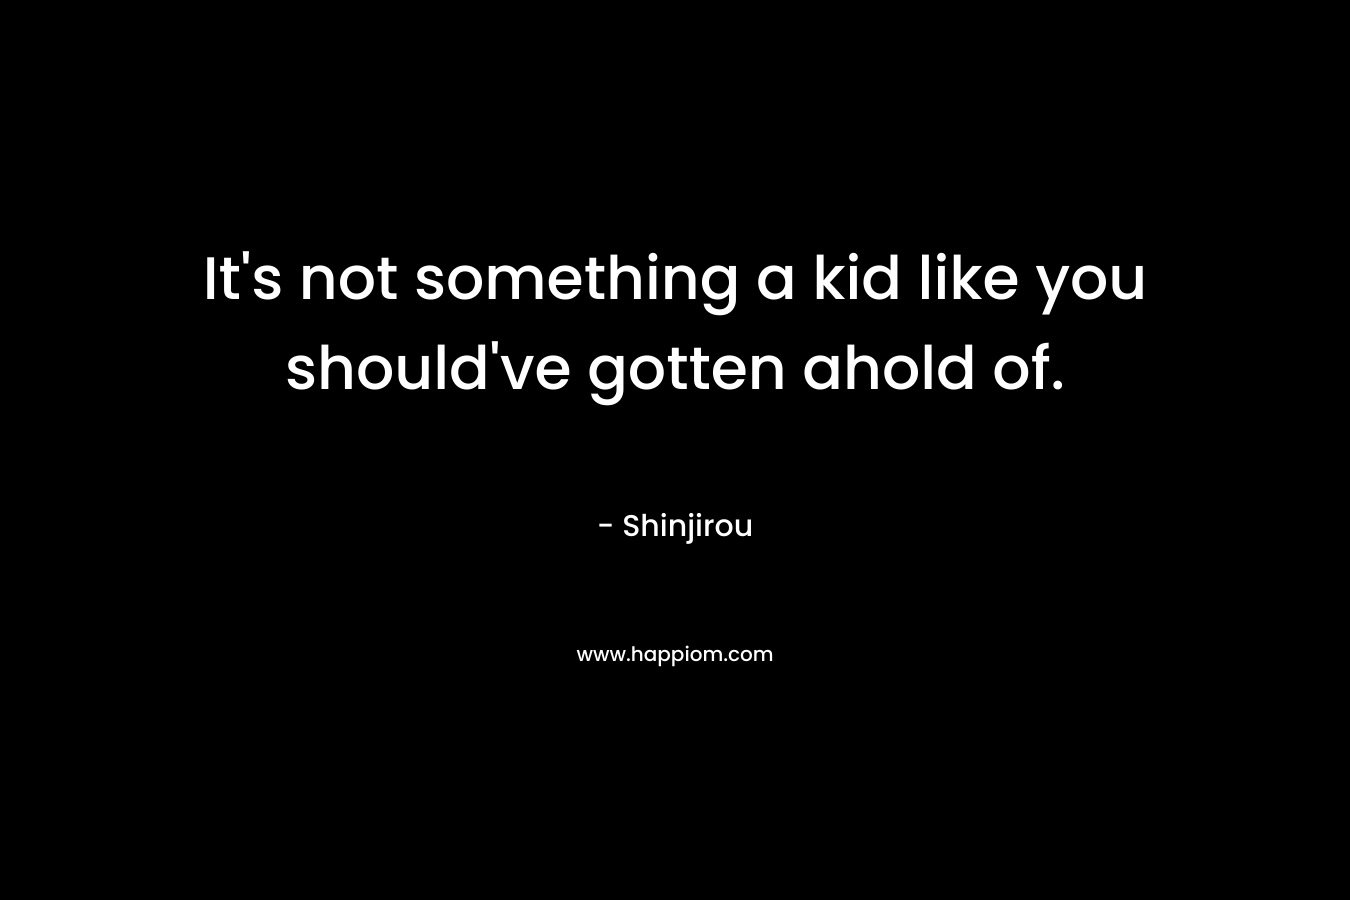 It’s not something a kid like you should’ve gotten ahold of. – Shinjirou